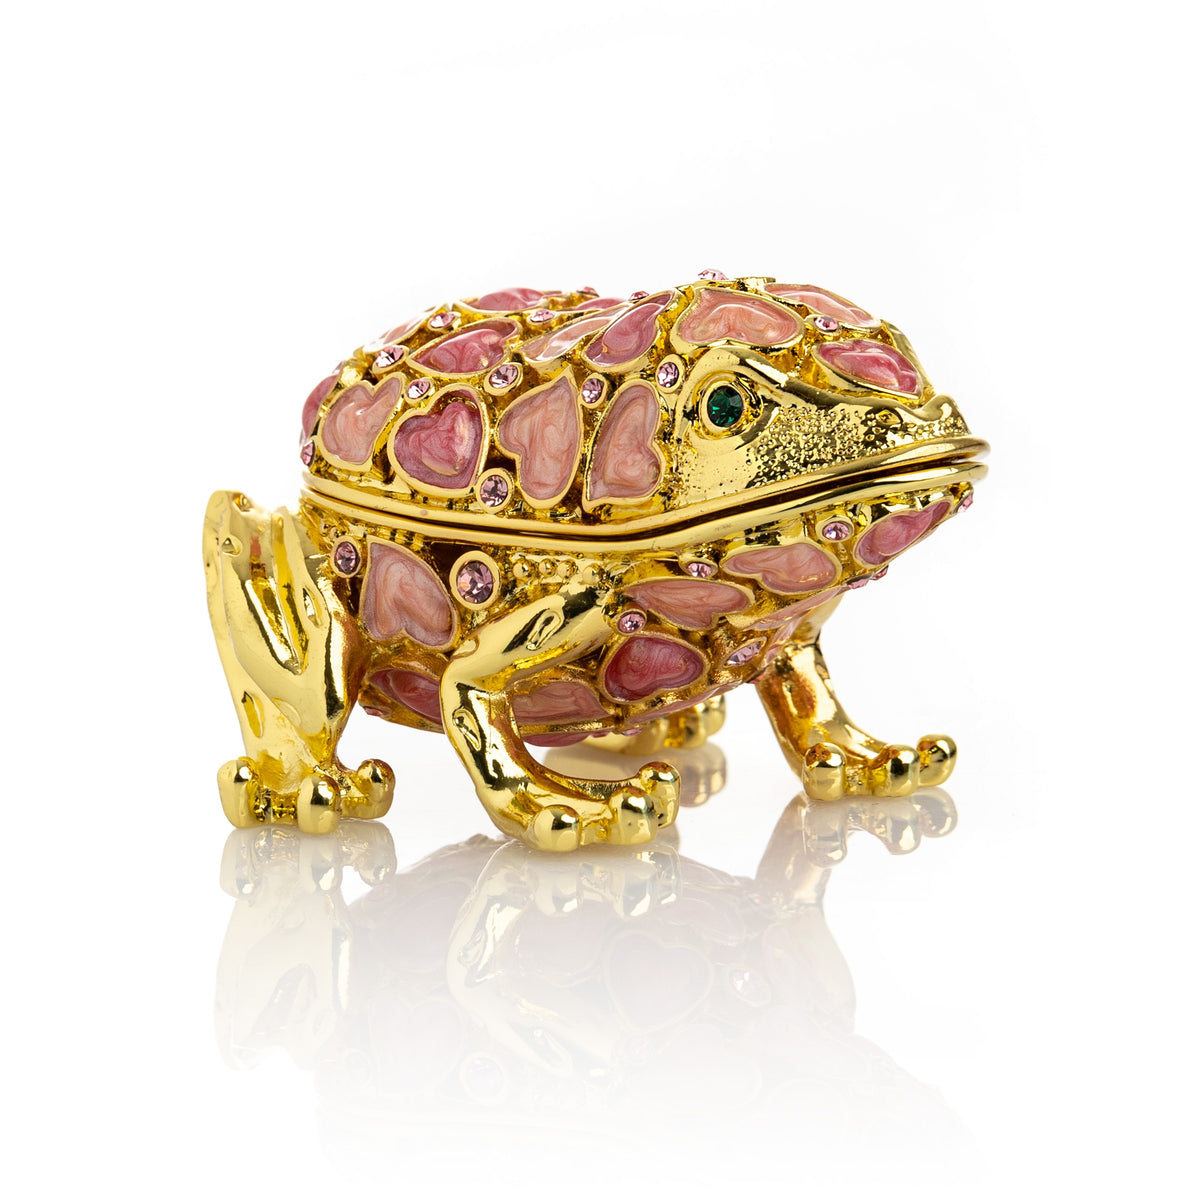 Golden Frog Decorated with Hearts